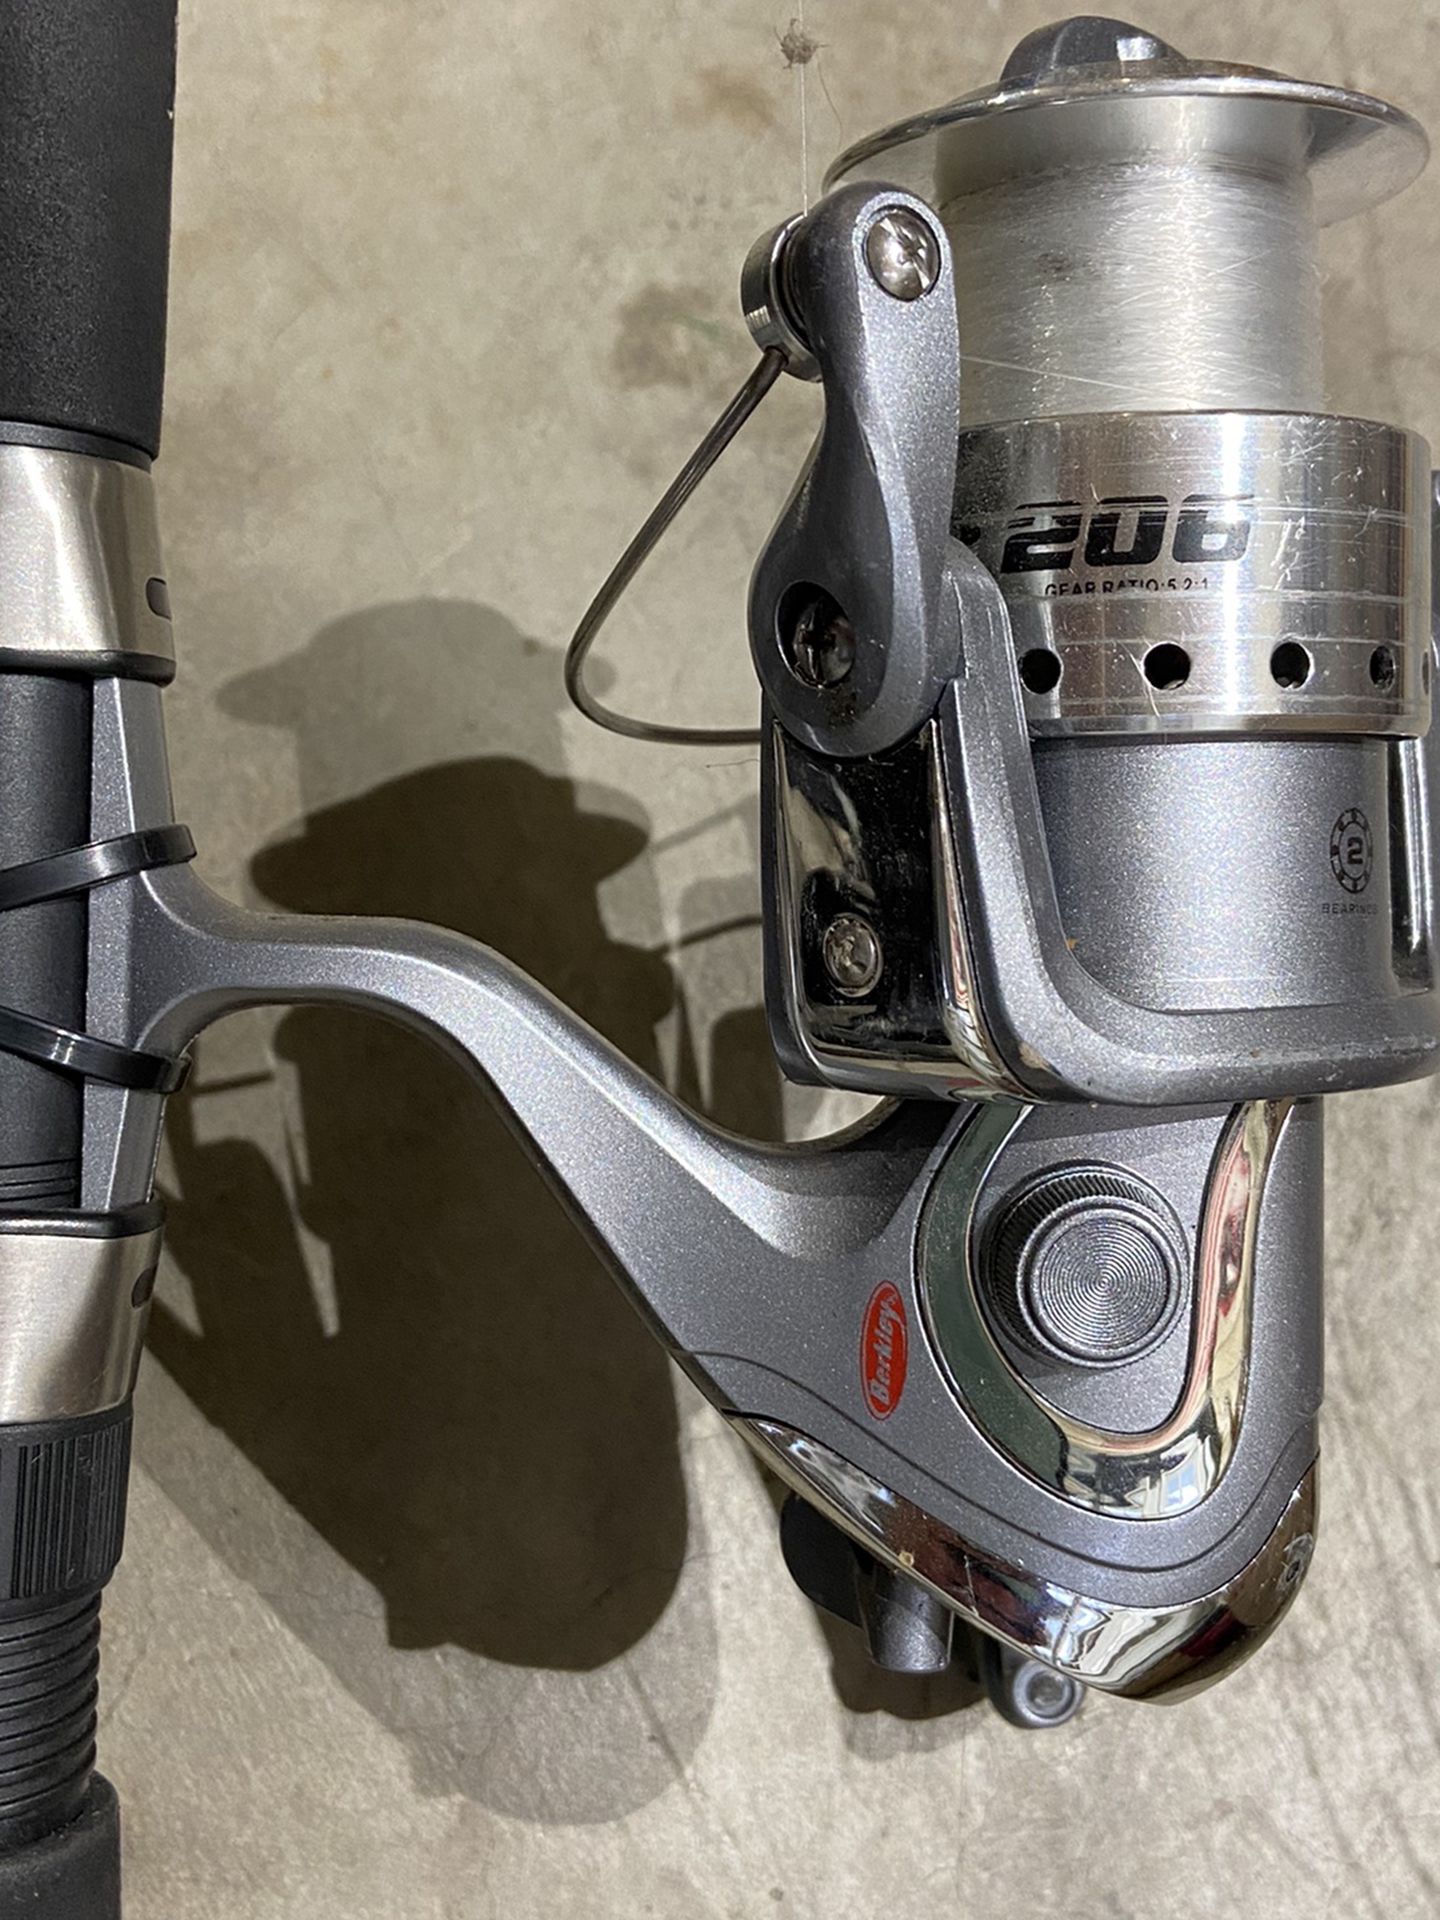 BERKLEY FUSION SPINNING REEL and FISHING ROD COMBO - $10